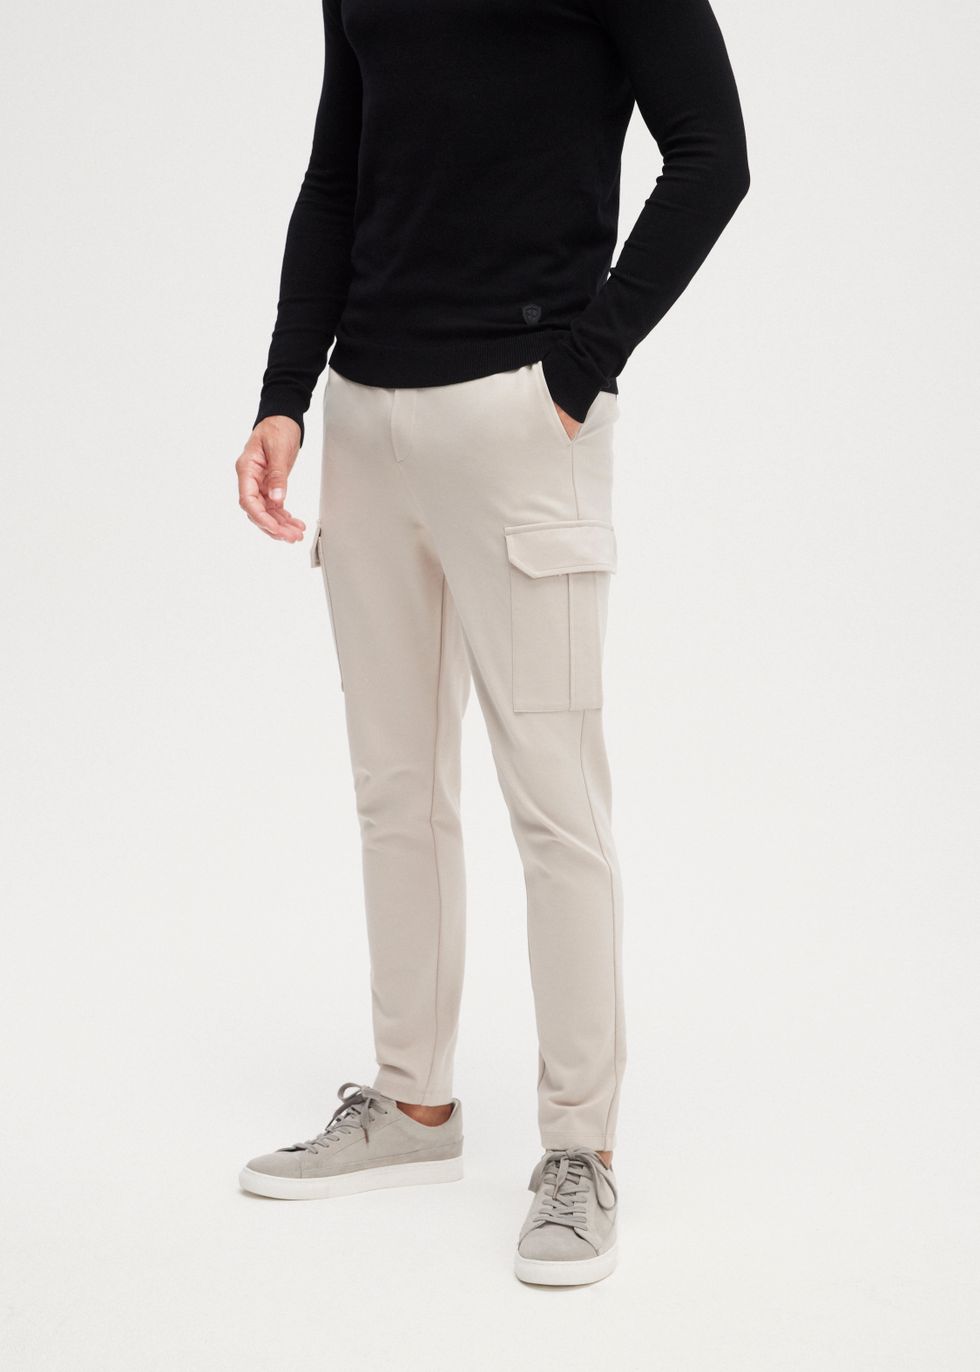 The Sting | Webshop - Cargo Pants